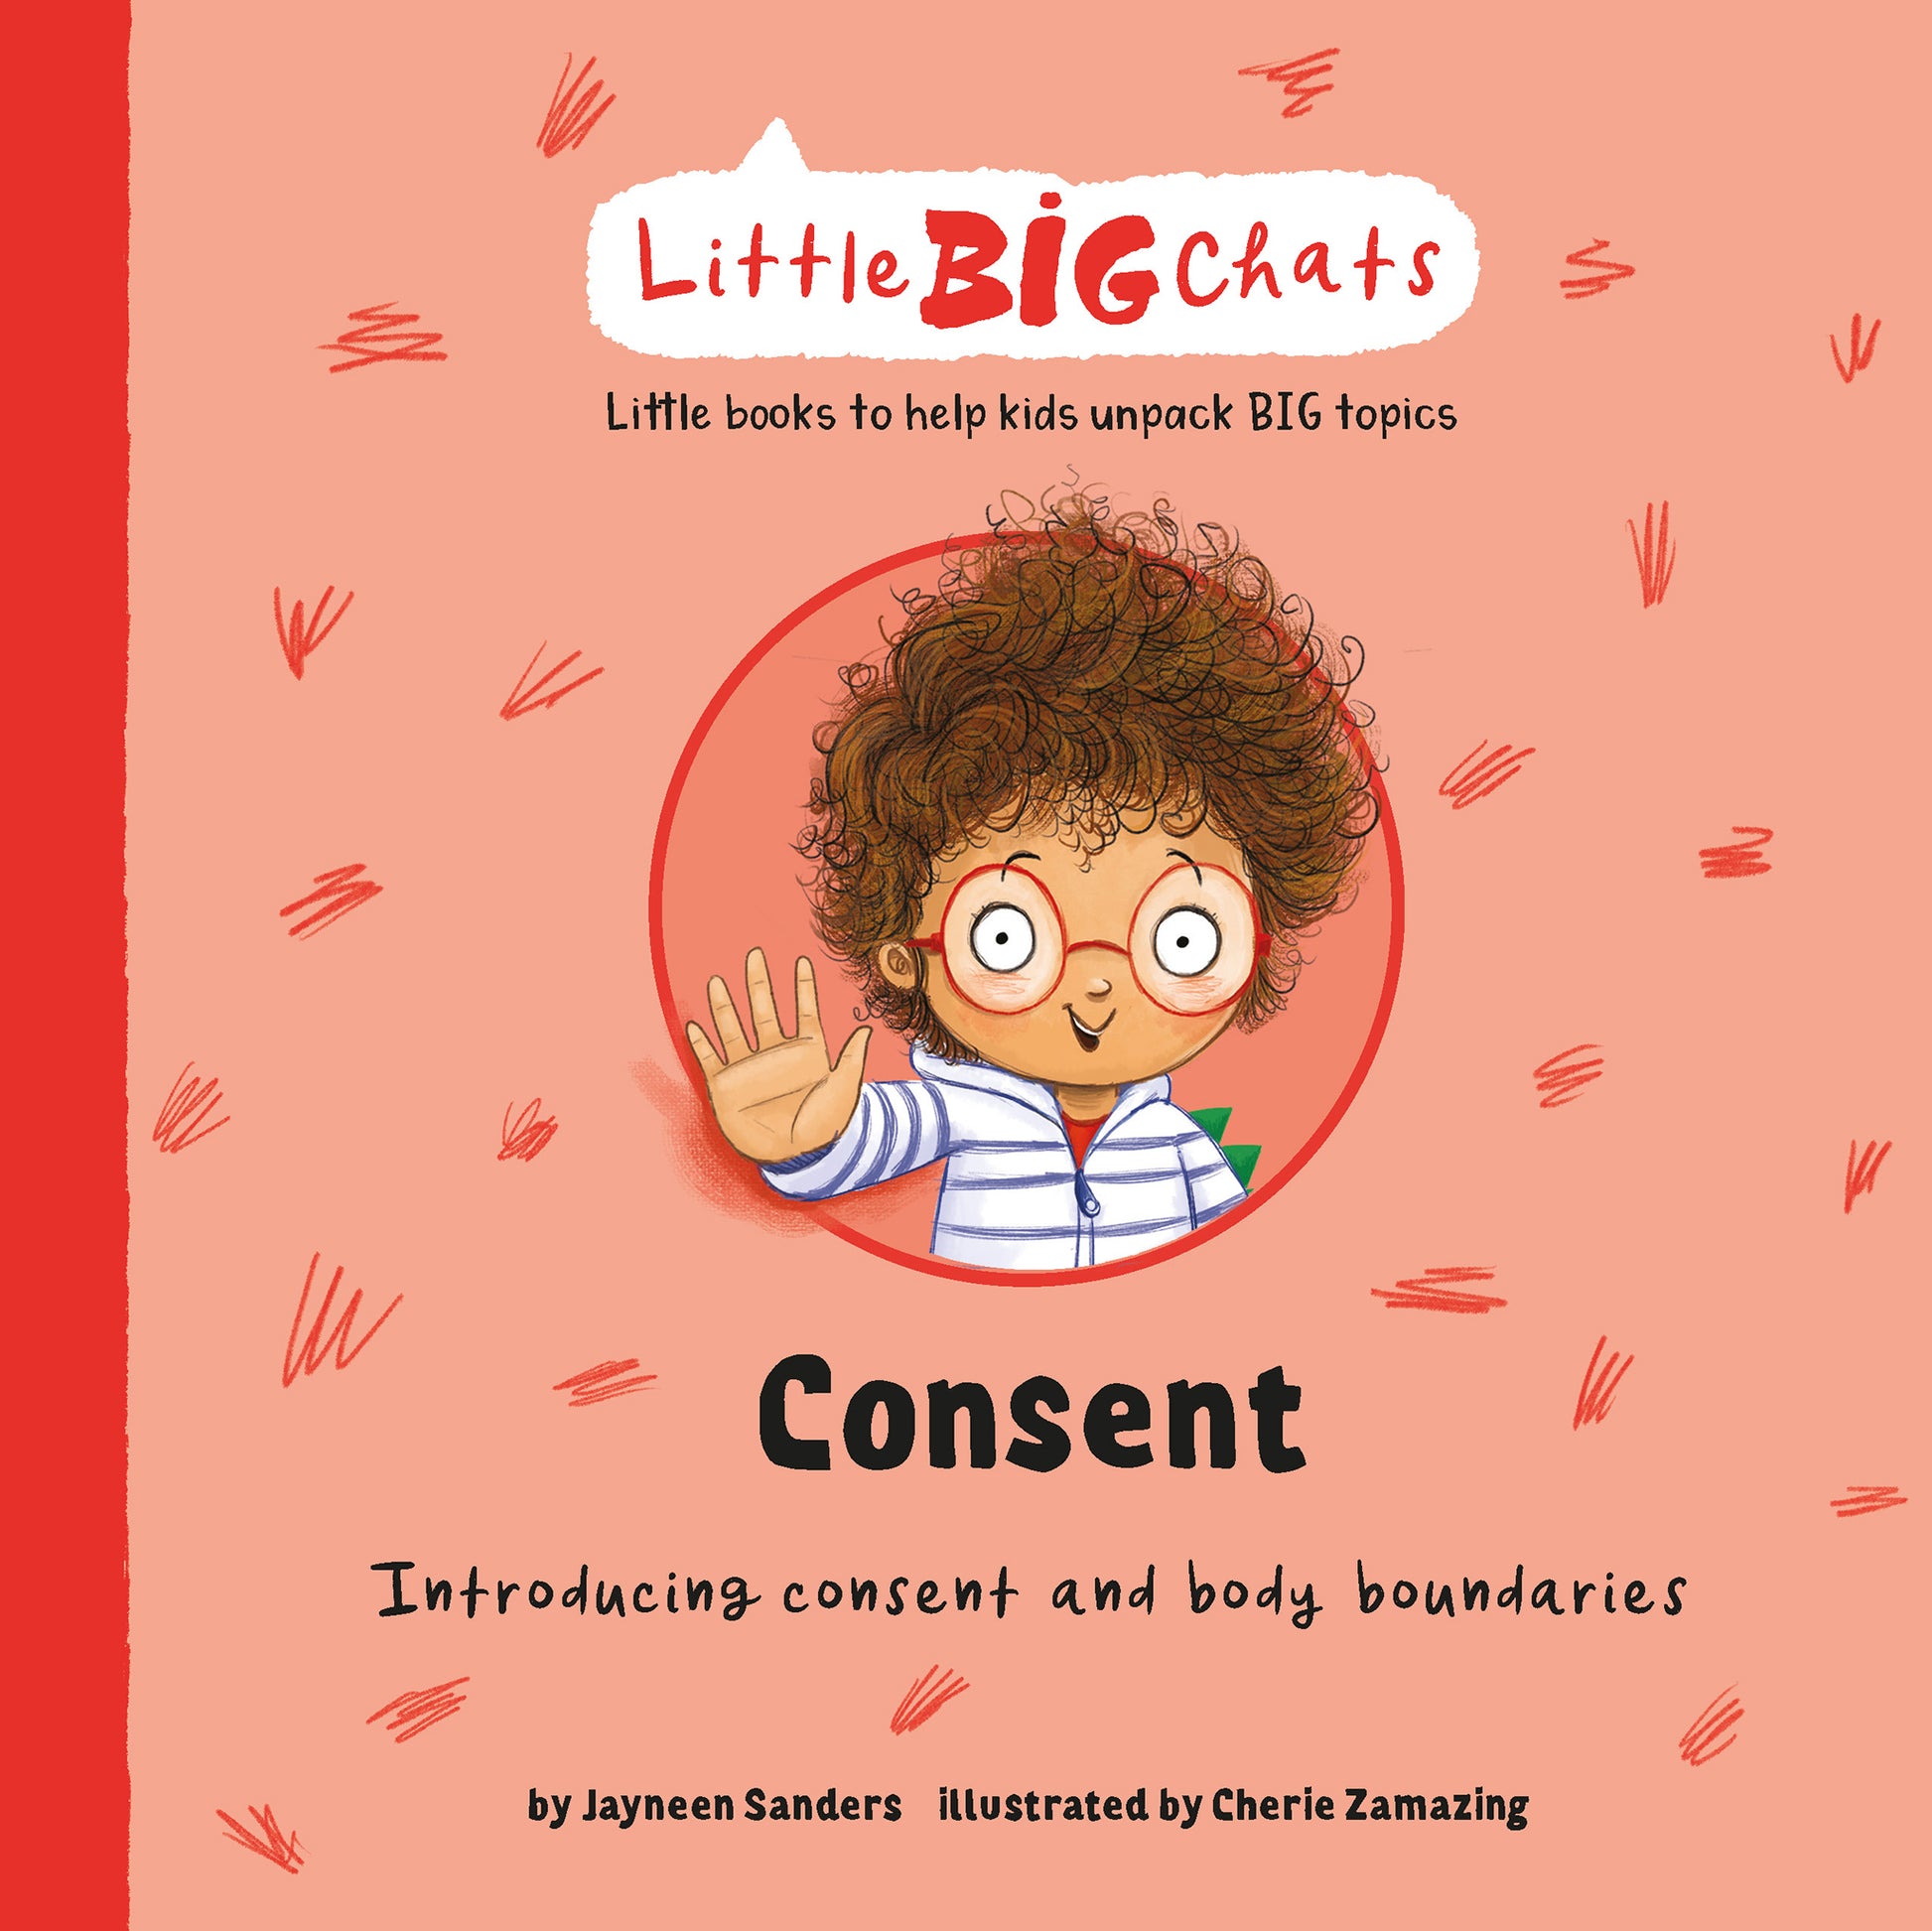 The cover of the Little BIG Chats book ‘Consent’ by Jayneen Sanders.